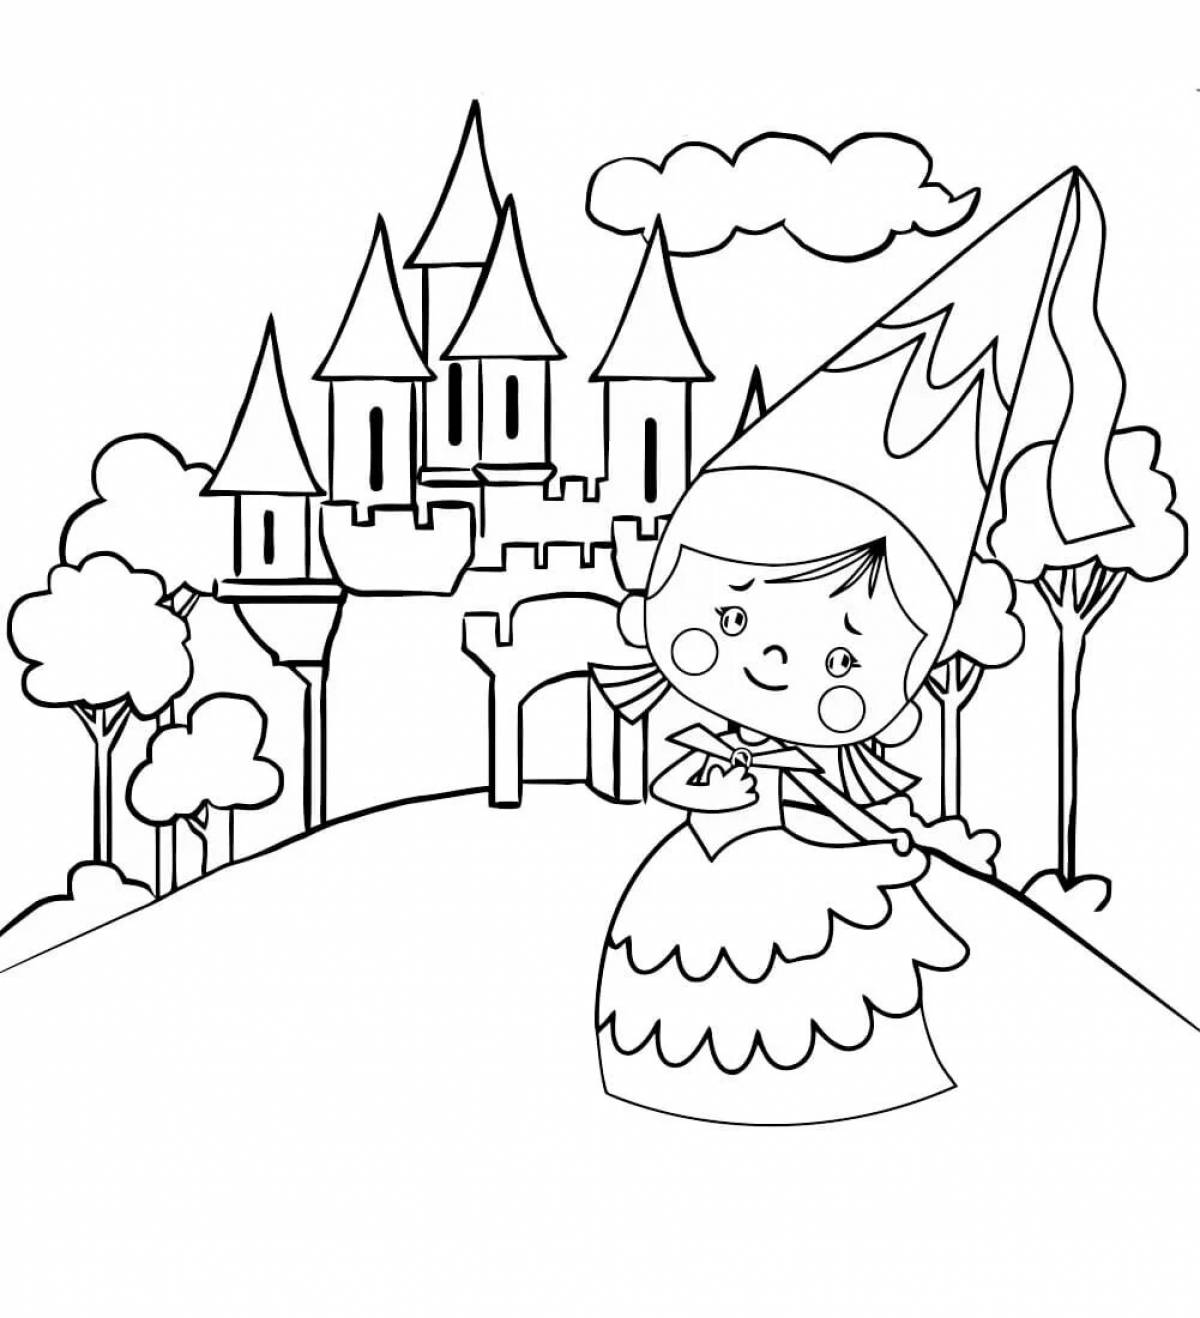 Curly castles coloring book for girls